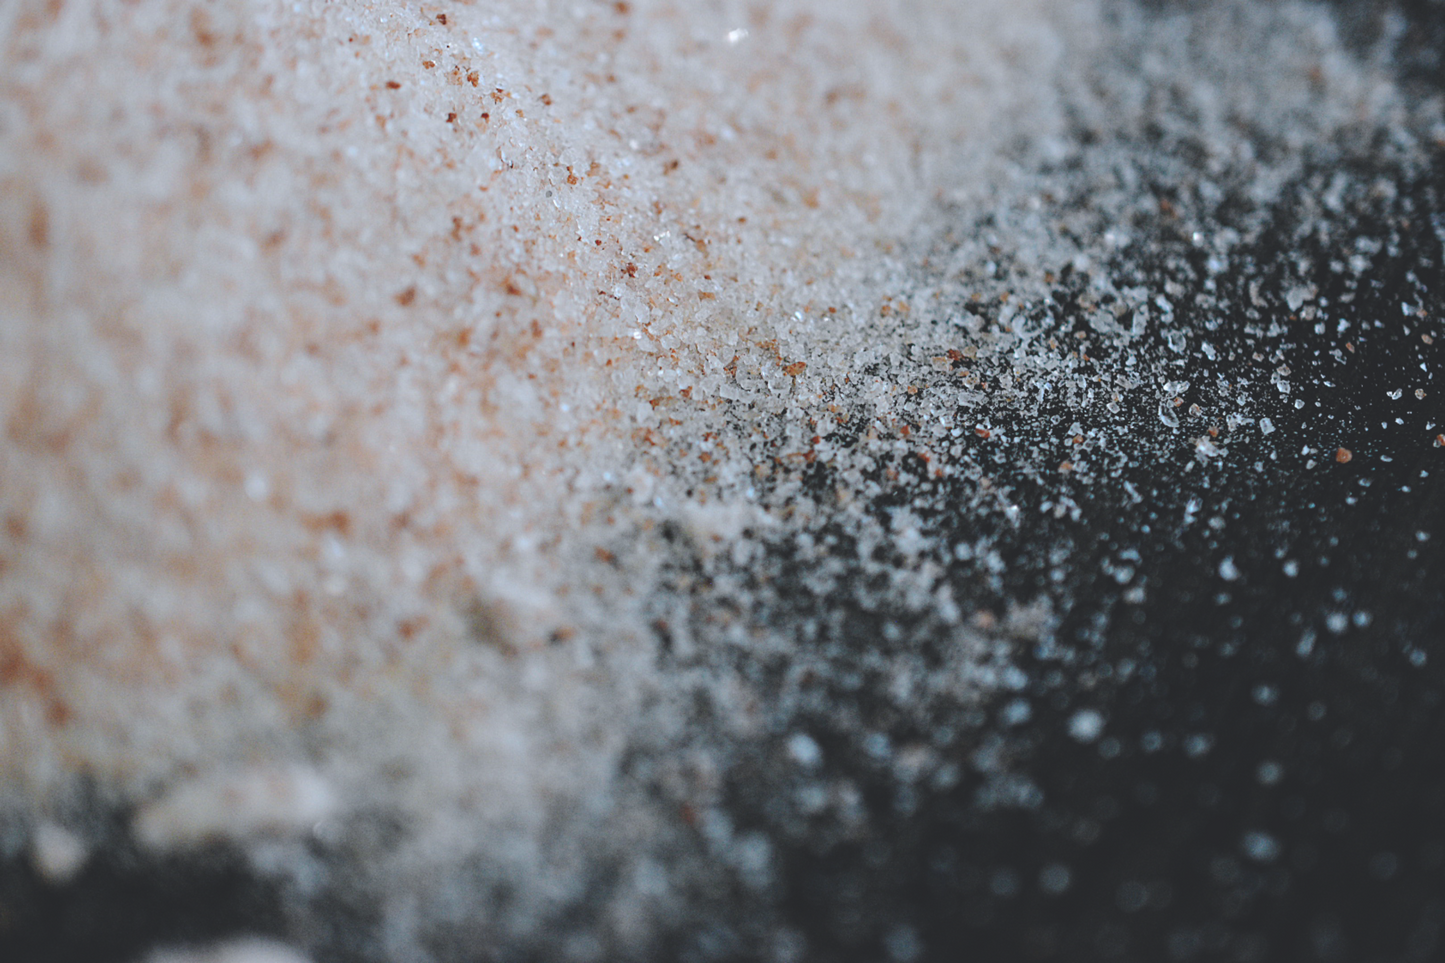 A close up view of the fine granules of pink himalayan salt scattered accross a dark surface. The pink salt is a light pink, with speckles of dark pink strewn throughout.